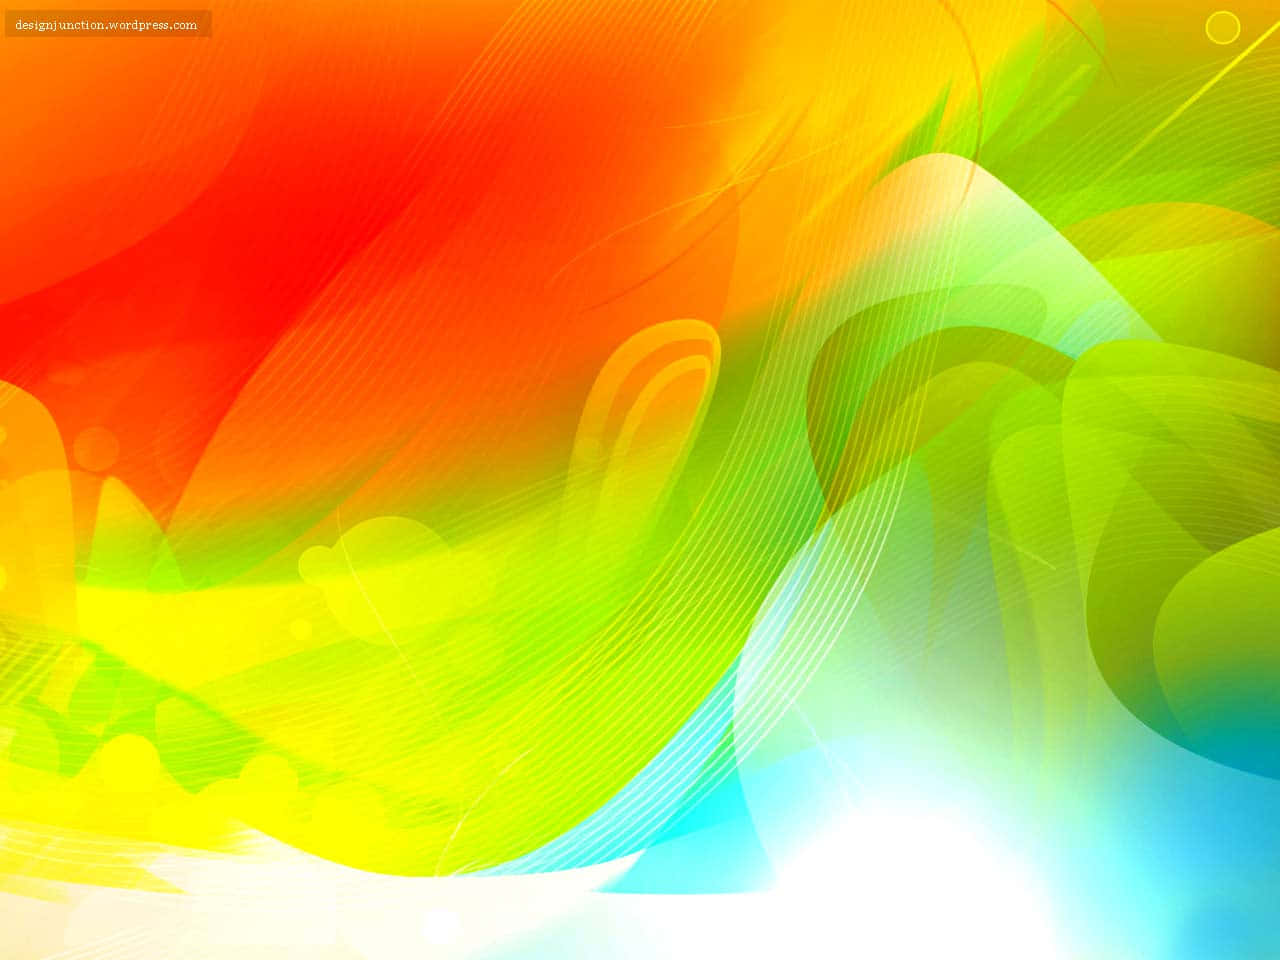 graphic designs backgrounds hd